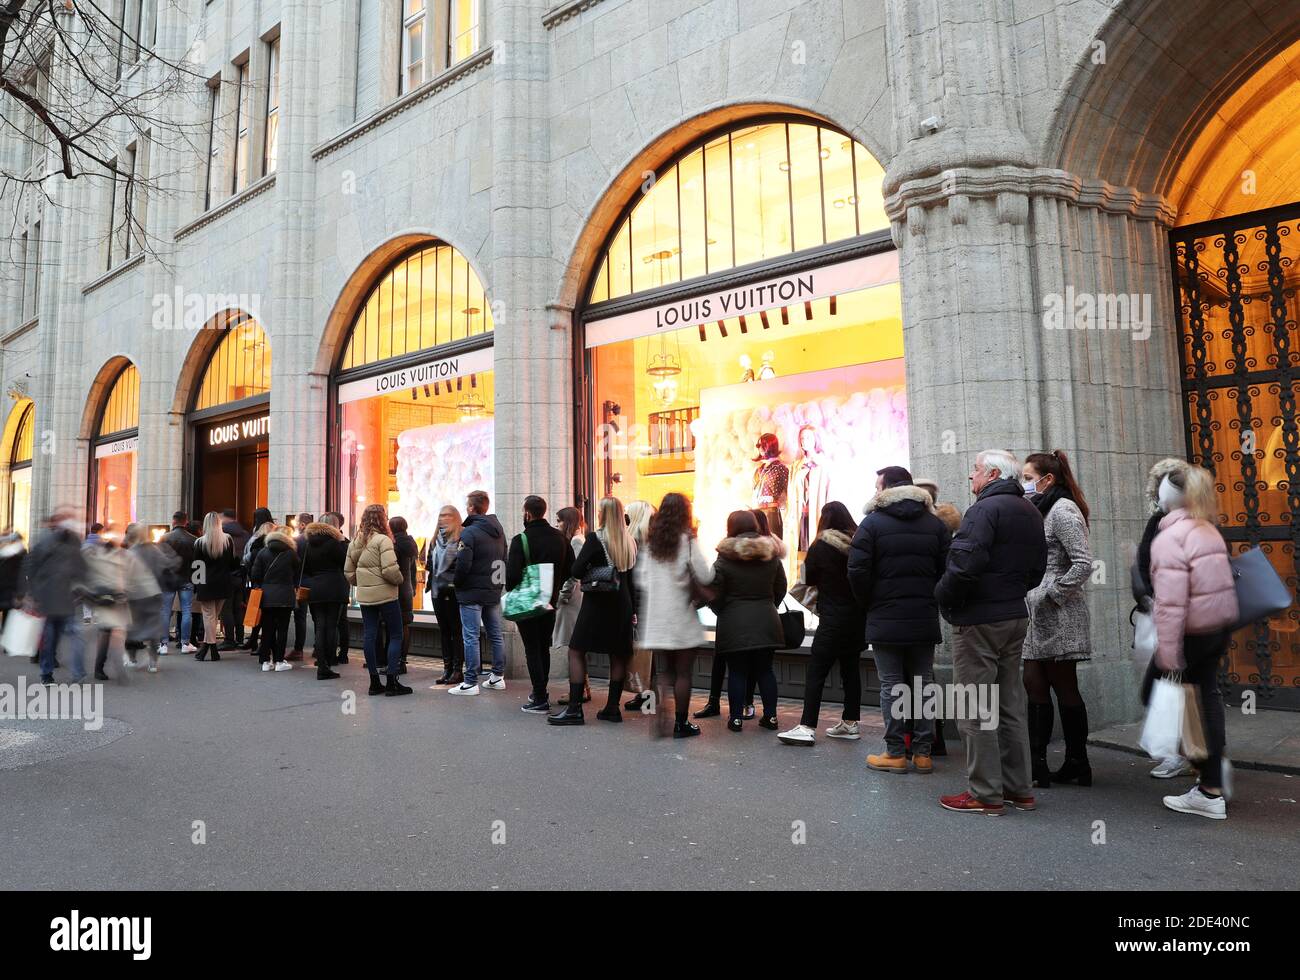 People queue in front of a store of the French luxury fashion brand Louis  Vuitton, as the spread of the coronavirus disease (COVID-19) continues, at  the Bahnhofstrasse shopping street in Zurich, Switzerland